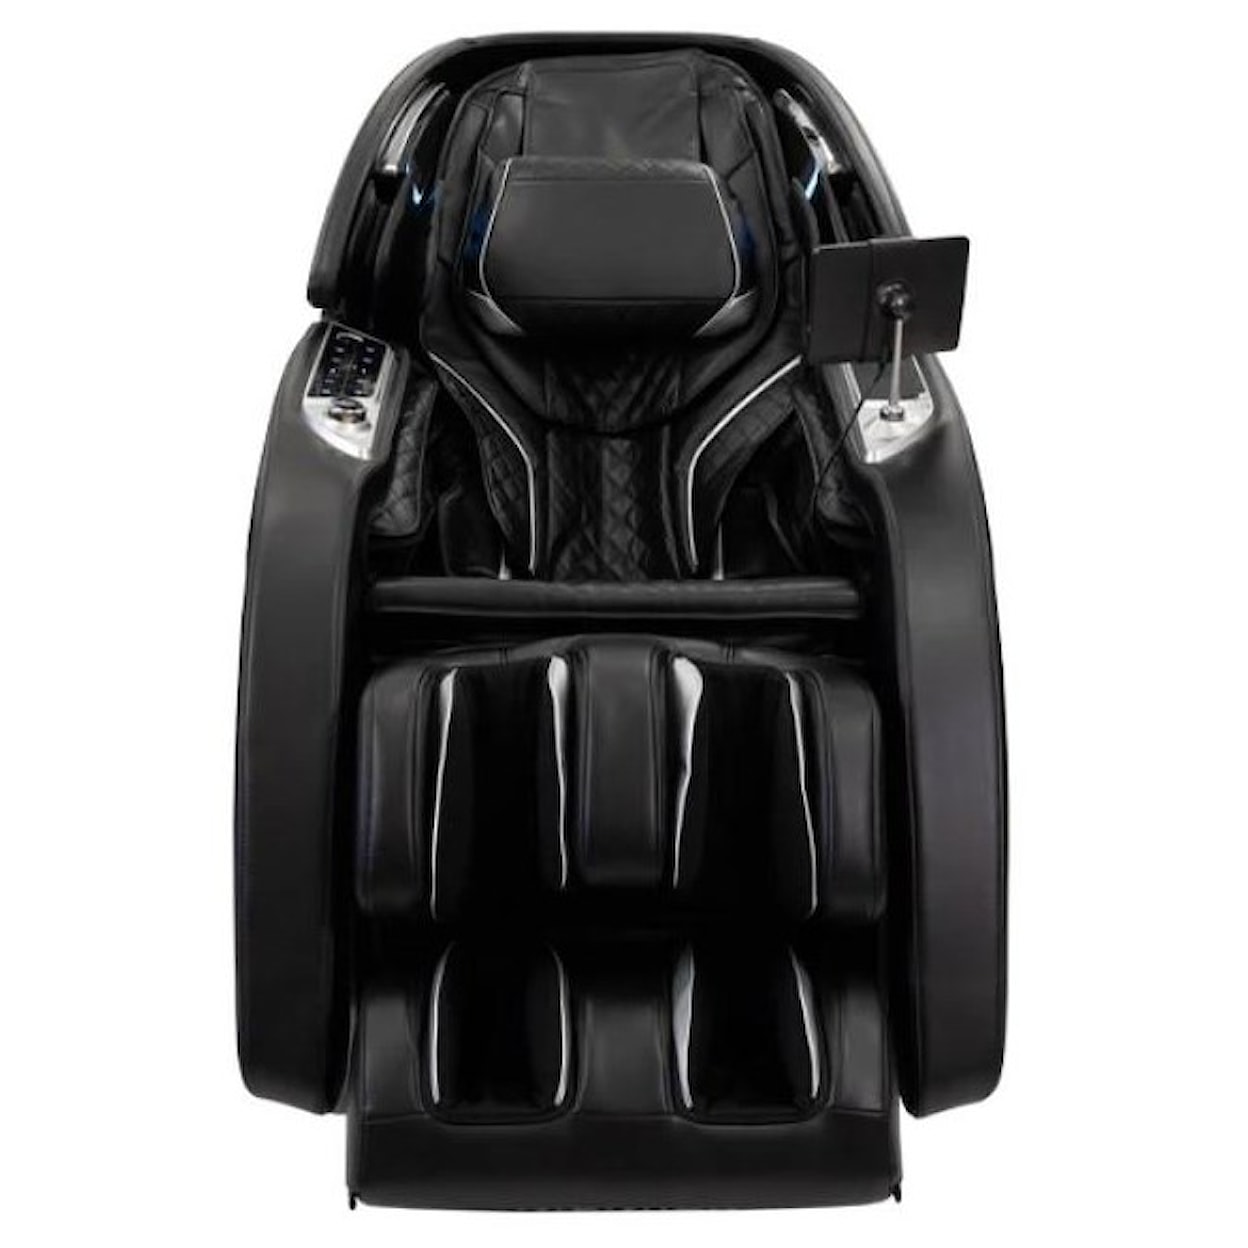 Infinity Luminary™Syner-D® Massage Chair Luminary™Syner-D® Massage Chair